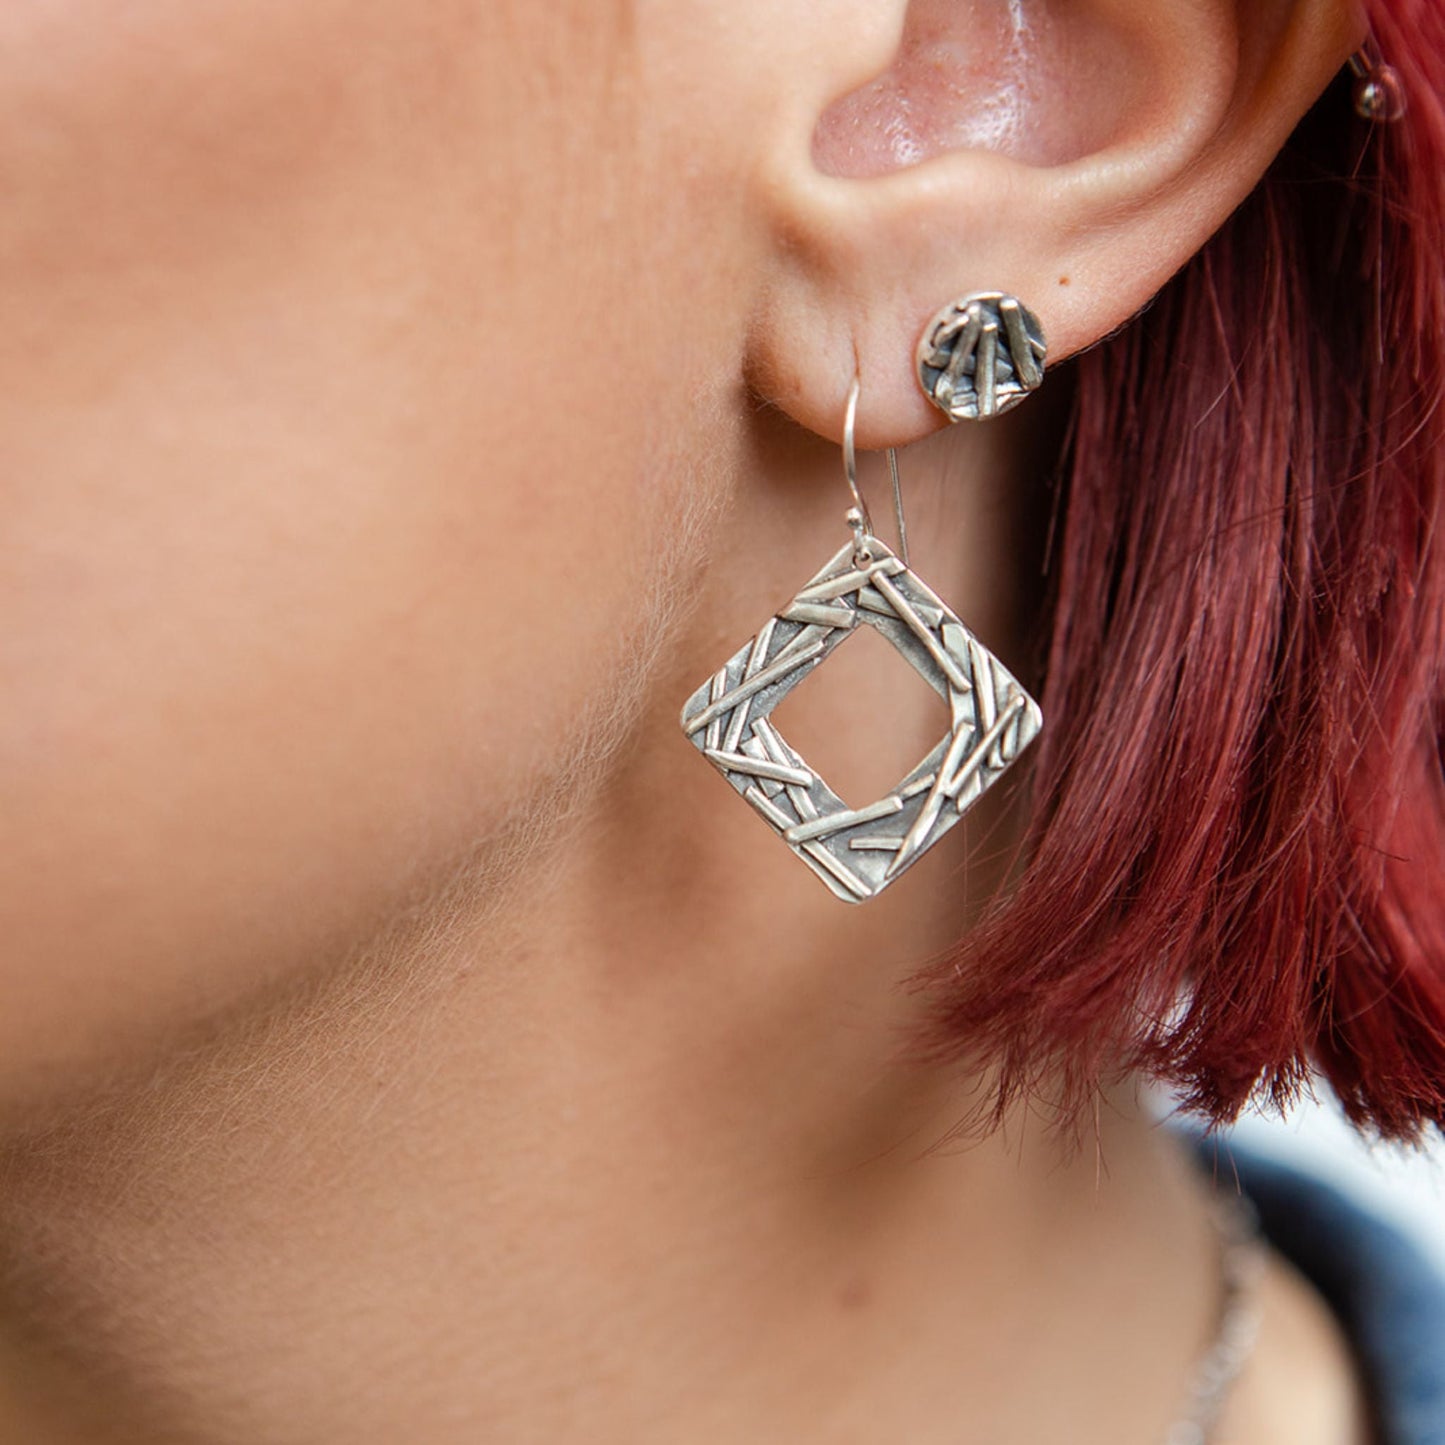 Square washer earrings close up on model